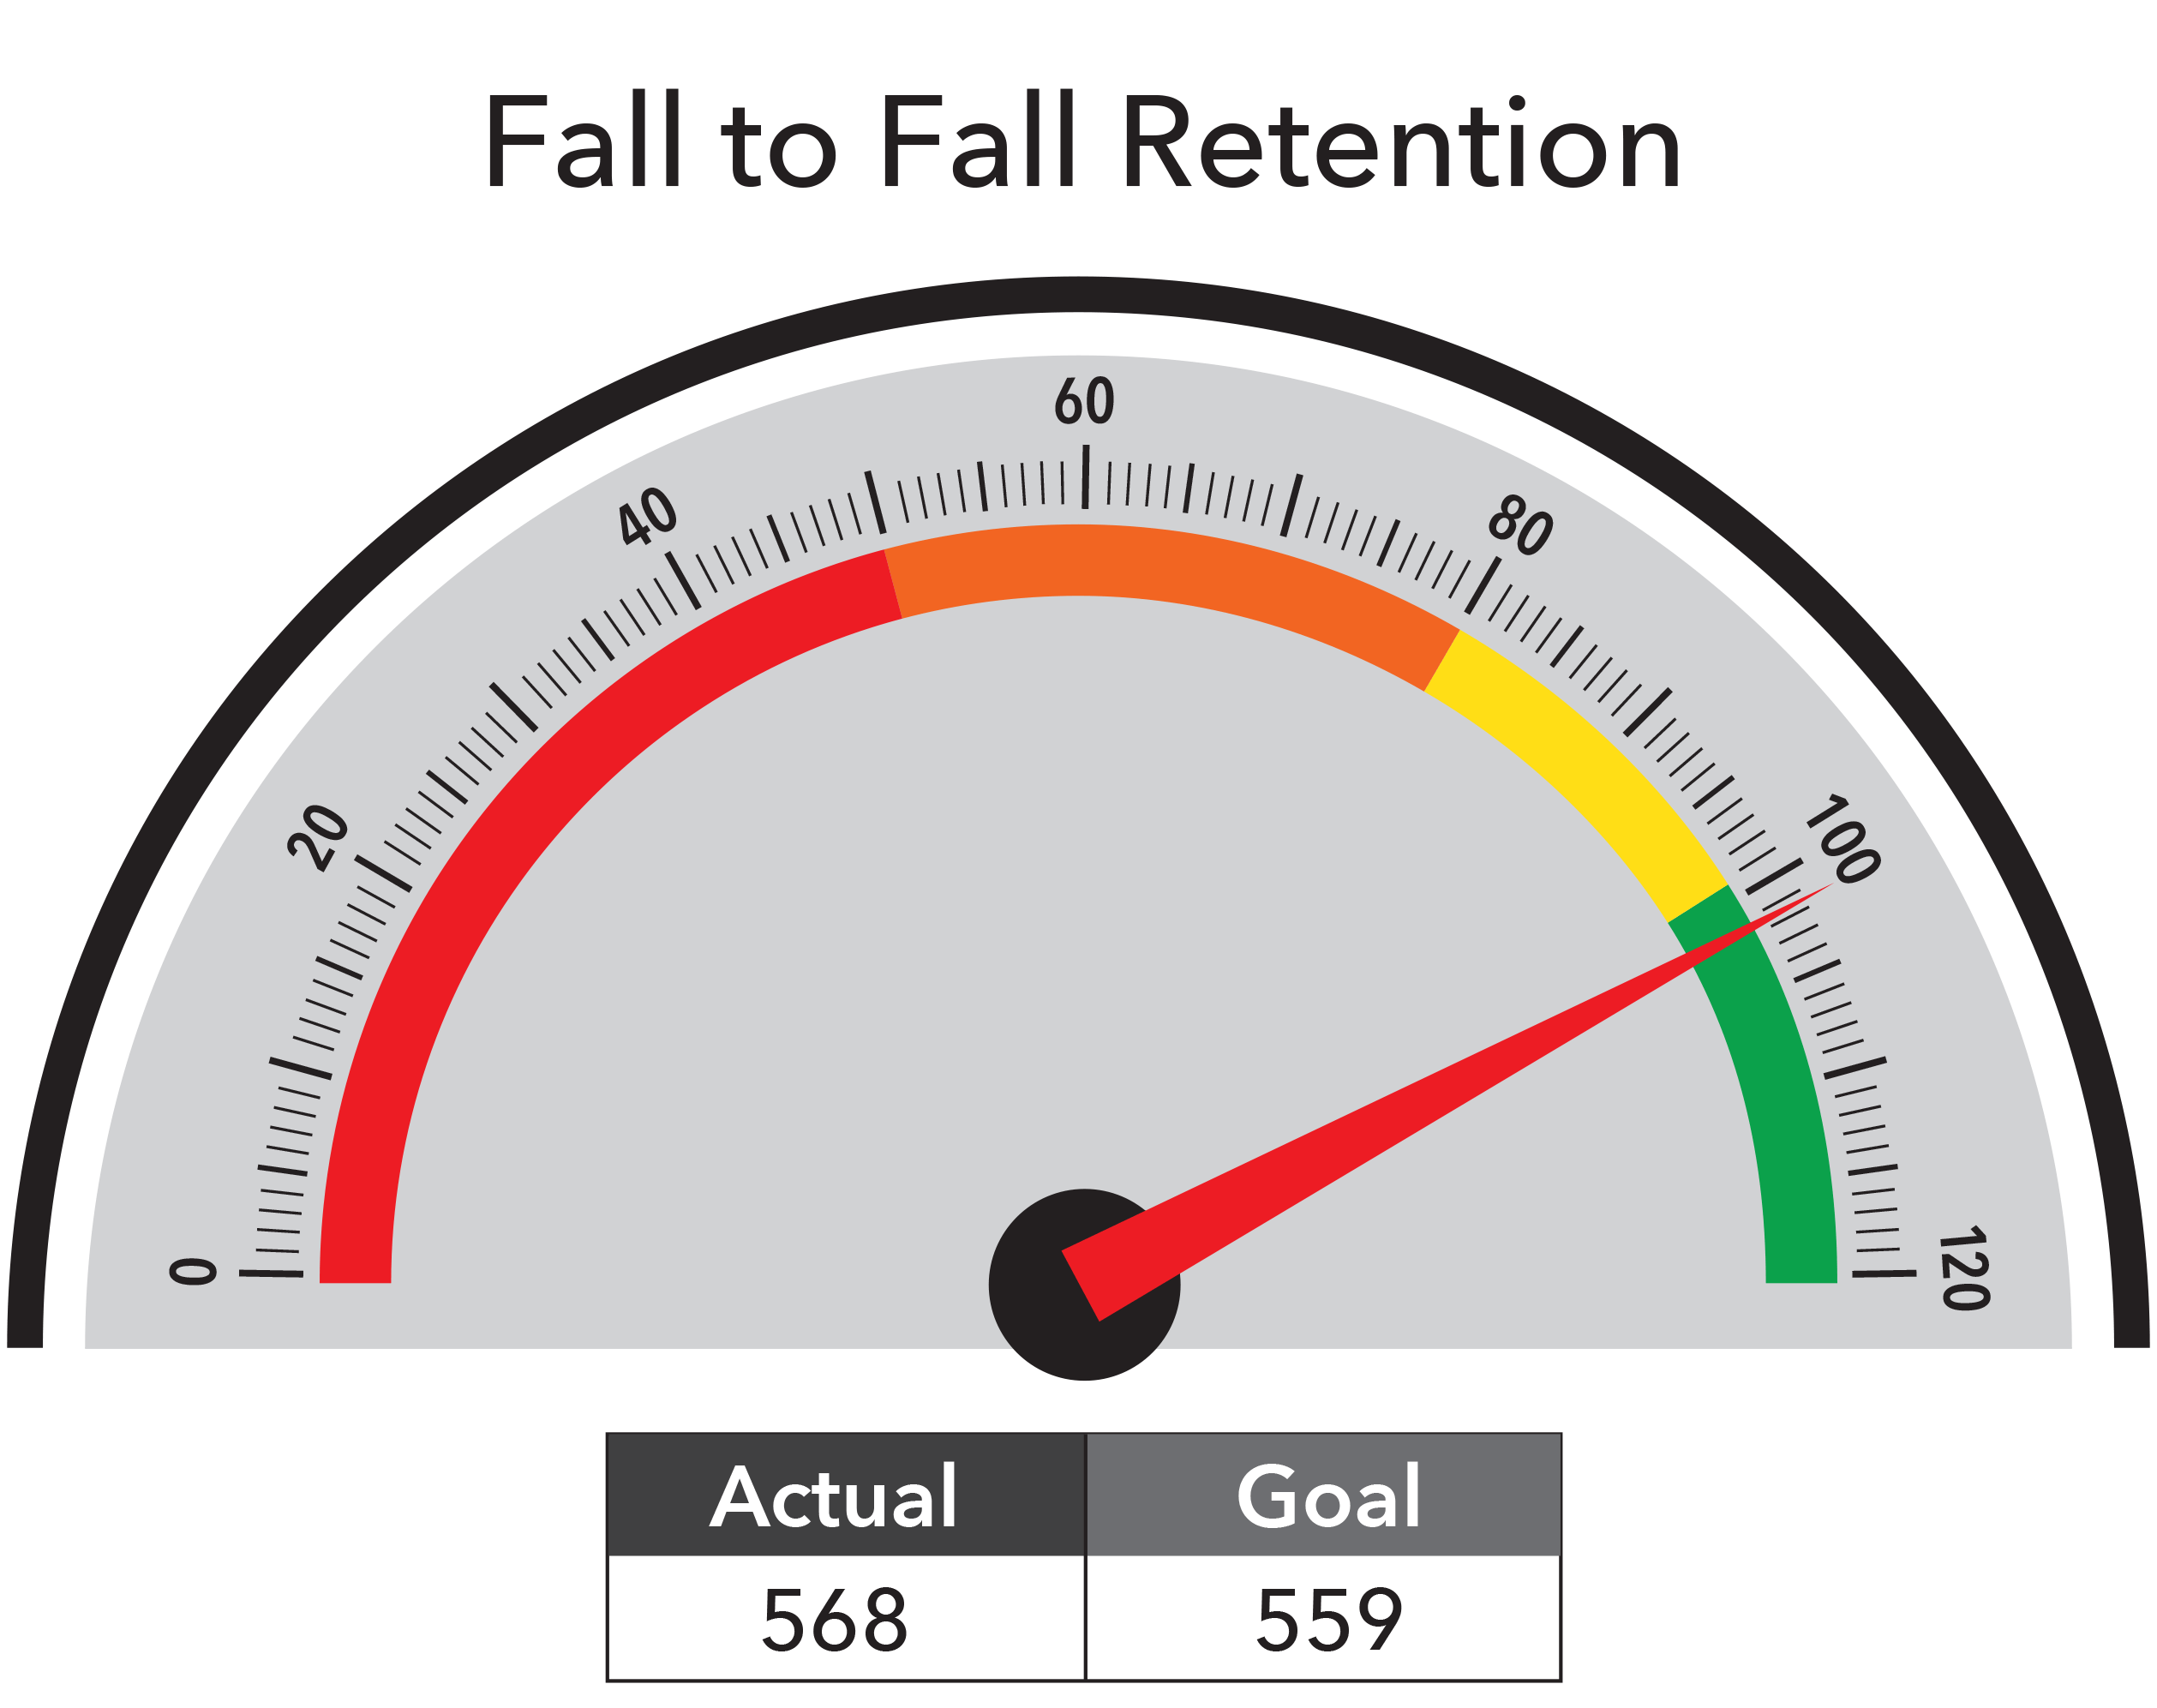 Fall to Fall Retention - Actual 568, Goal 559